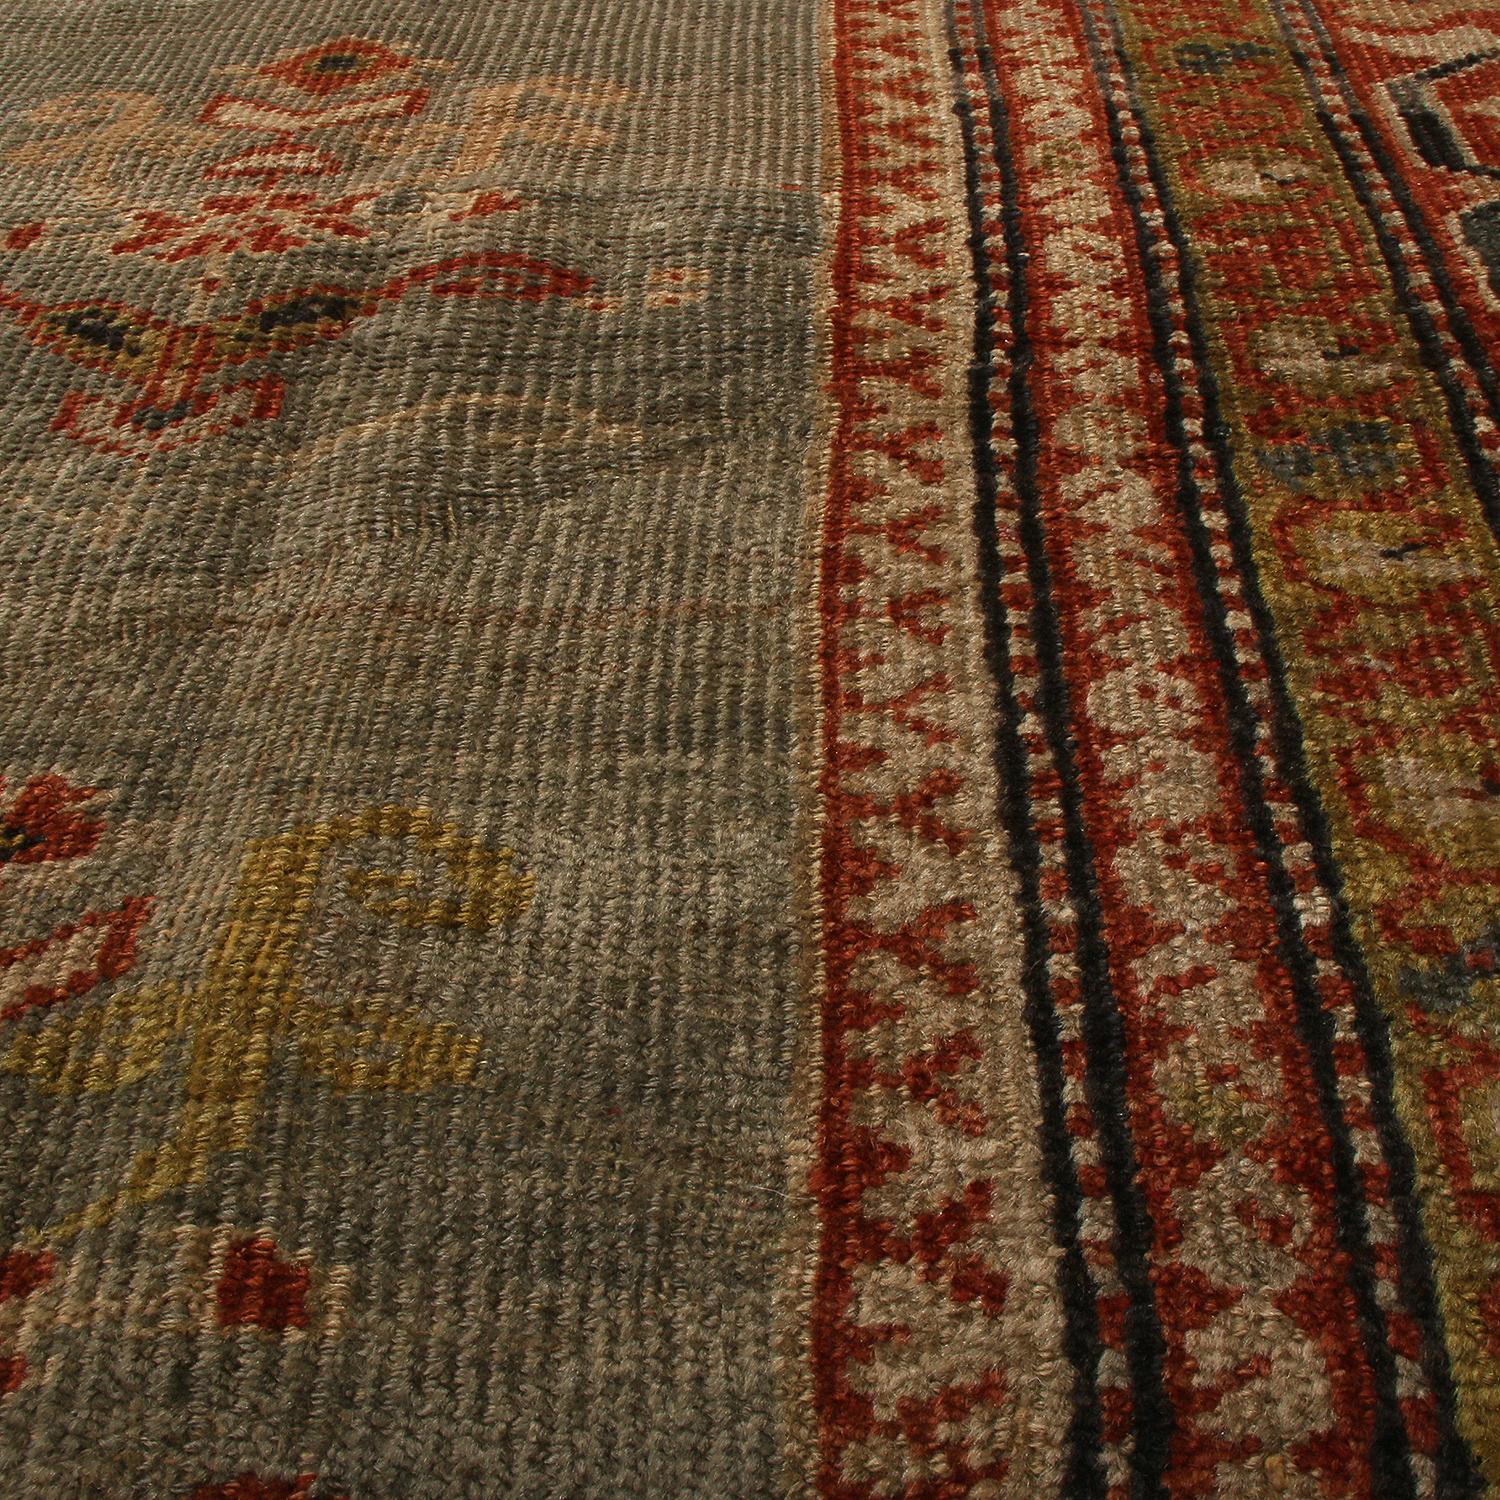 Late 19th Century Antique Sultanabad Blue and Burgundy Wool Persian Rug with Gold-Brown Highlights